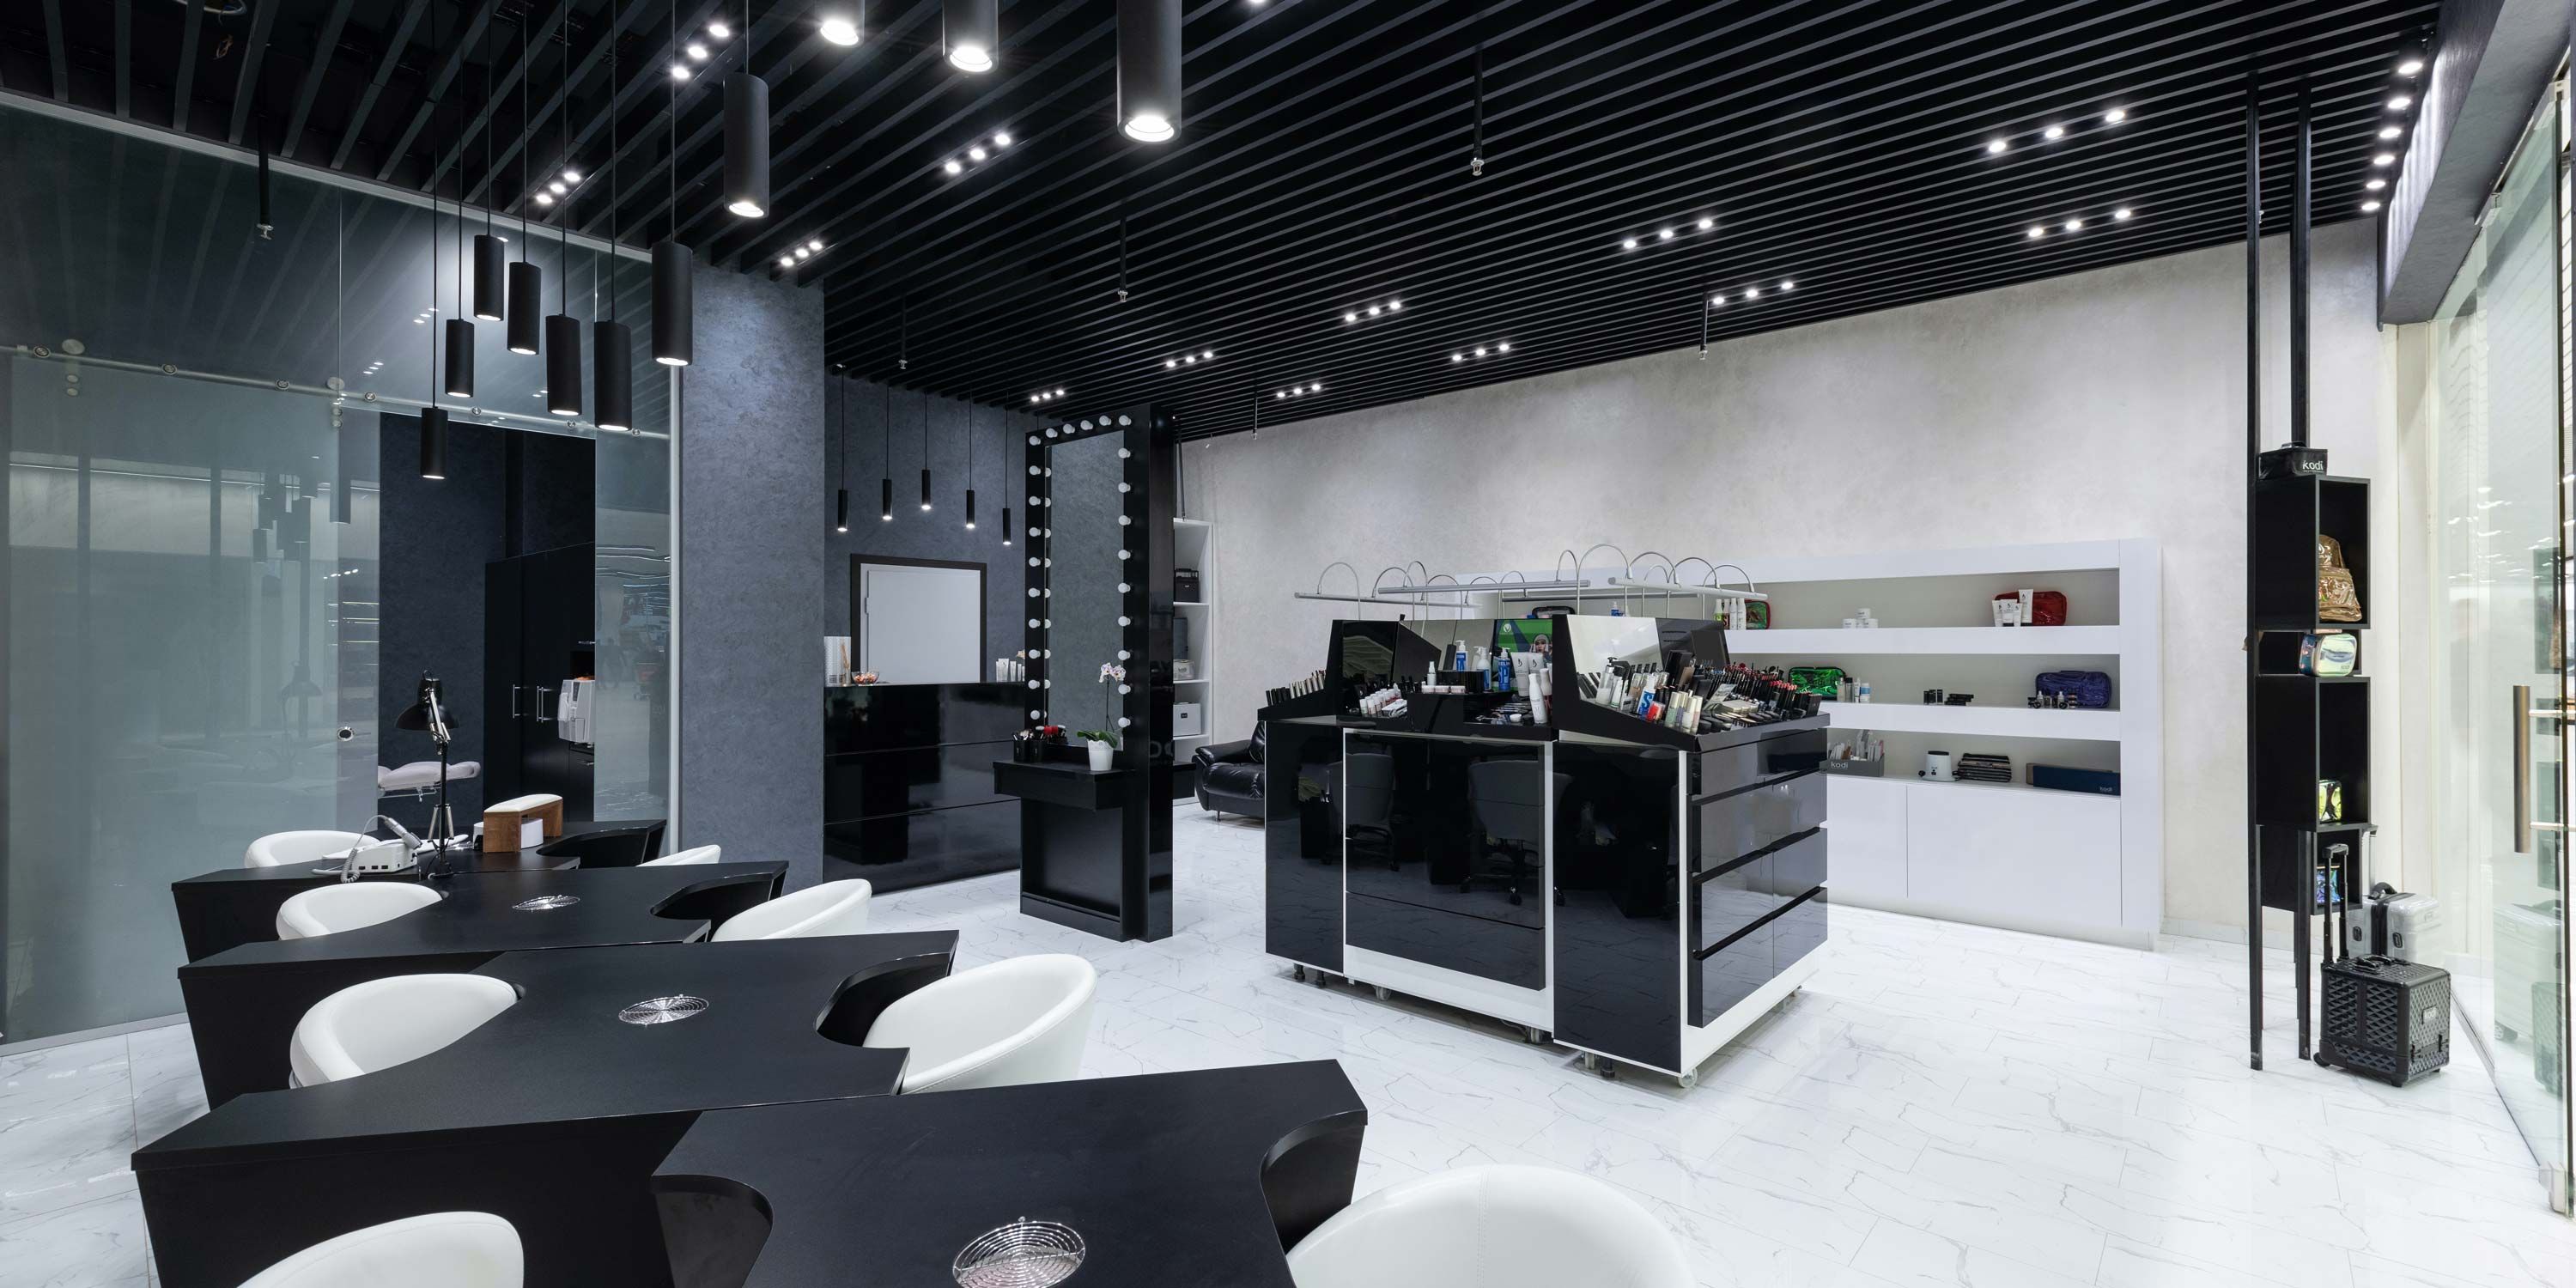 retail space with lighting and spa technology